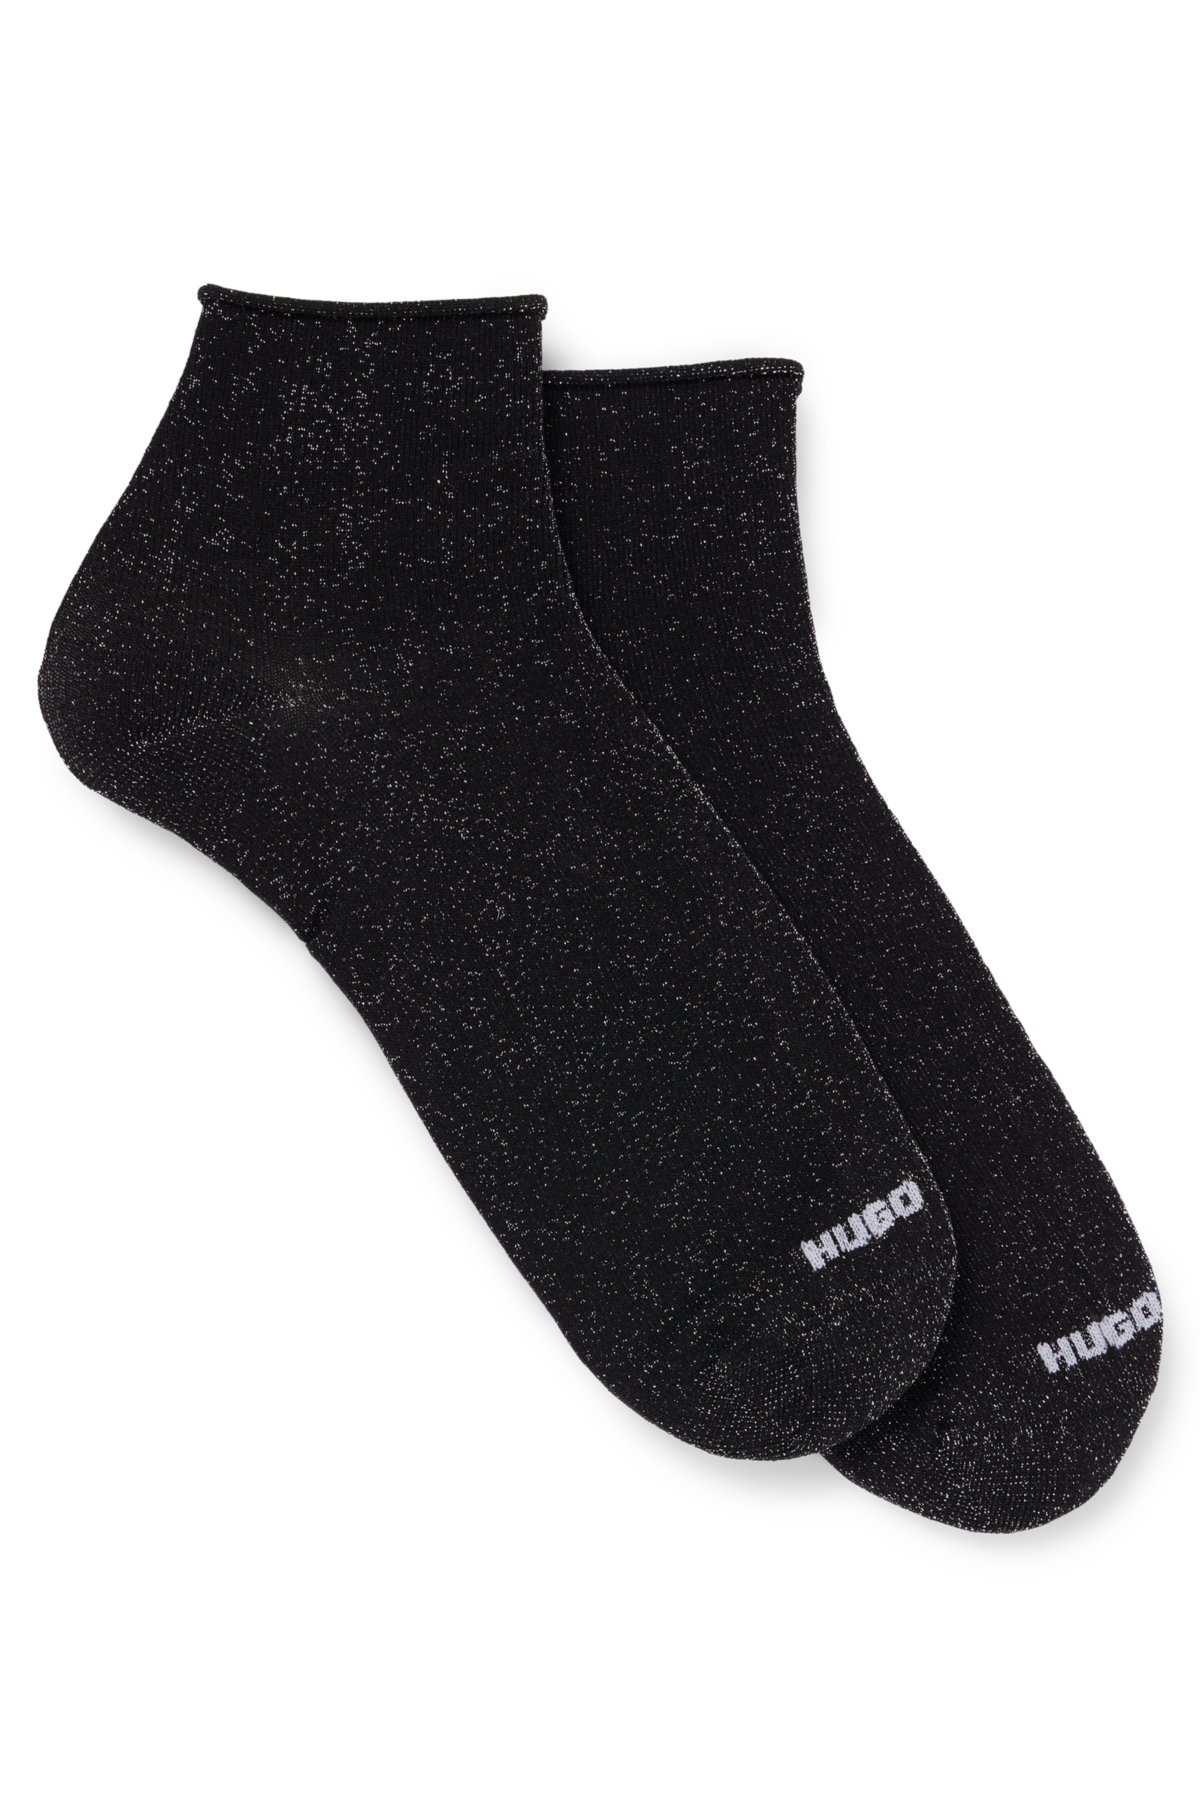   Essentials Women's Casual Crew Socks, 6 Pairs, Black,  6-9 : Clothing, Shoes & Jewelry